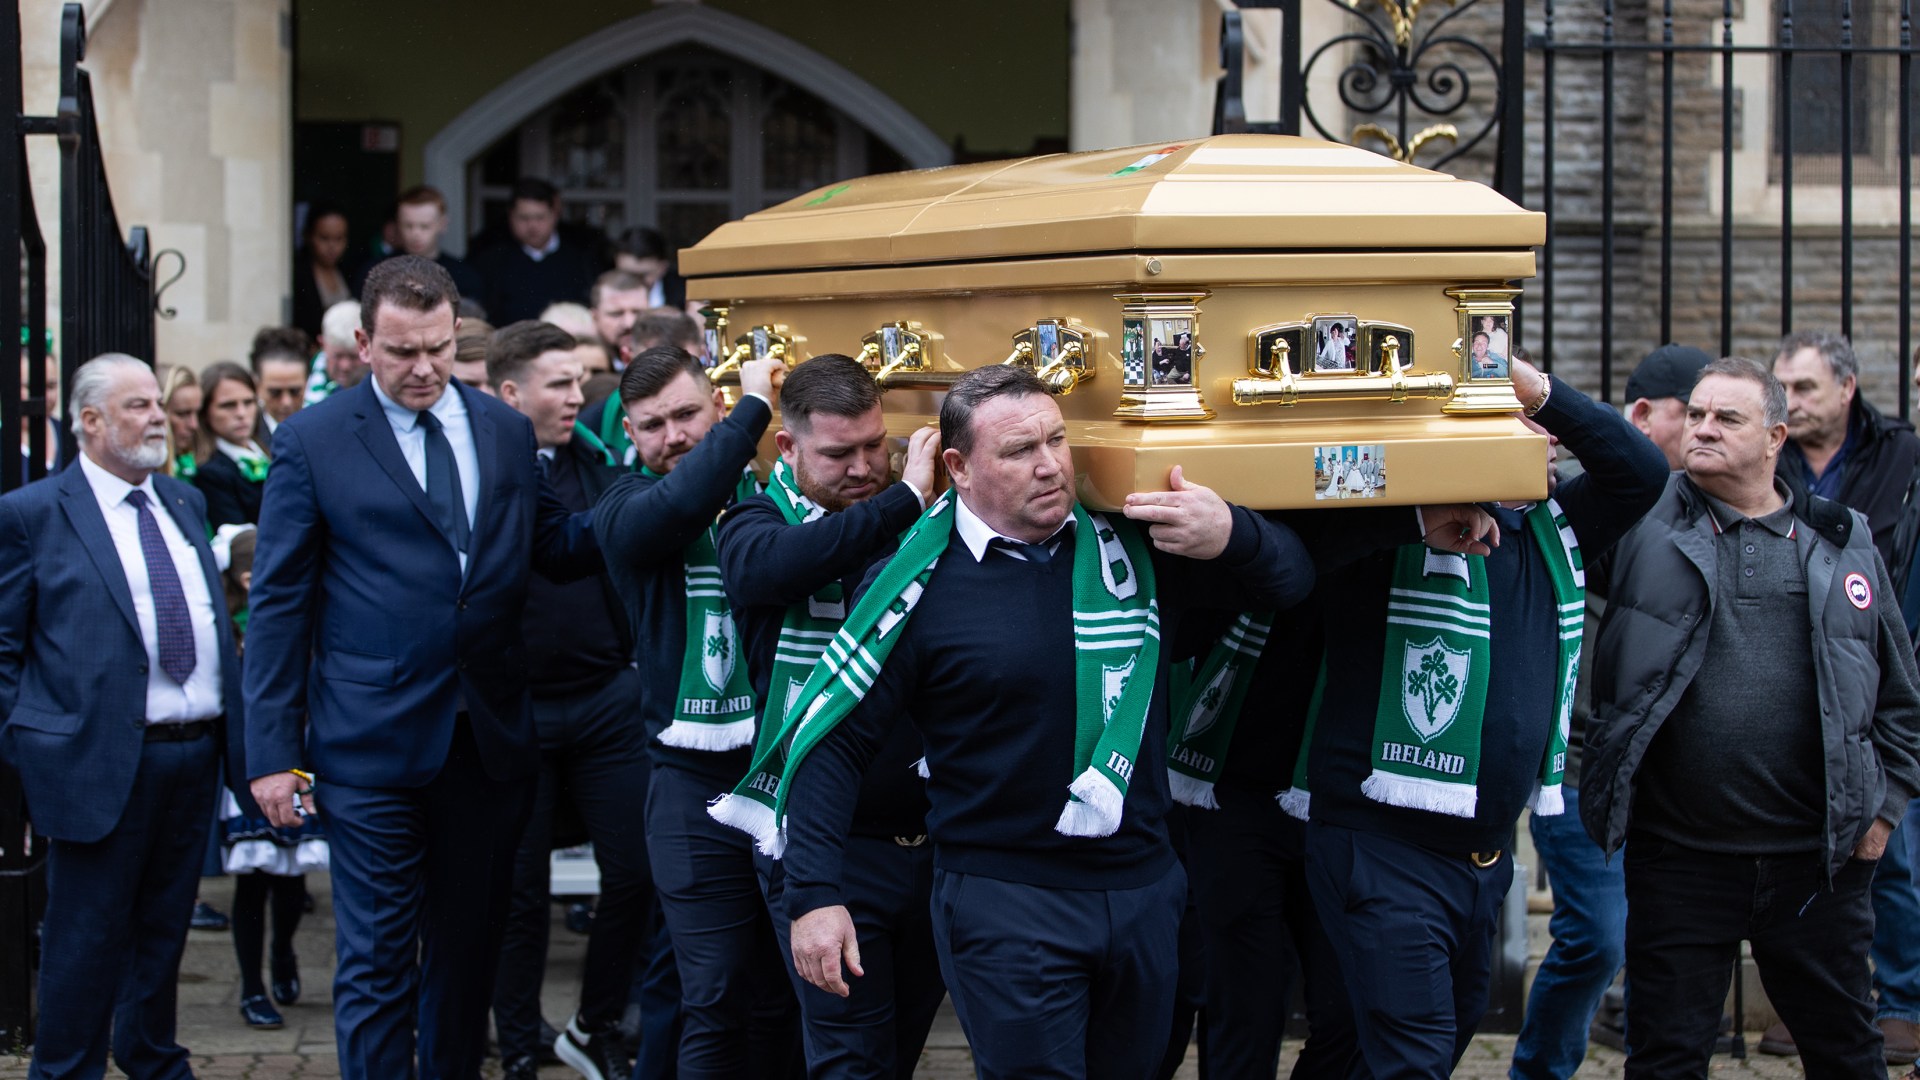 Fleet of Rolls Royces lead funeral procession for Gypsy King Big Daddy as mourners in green carry his gold coffin [Video]